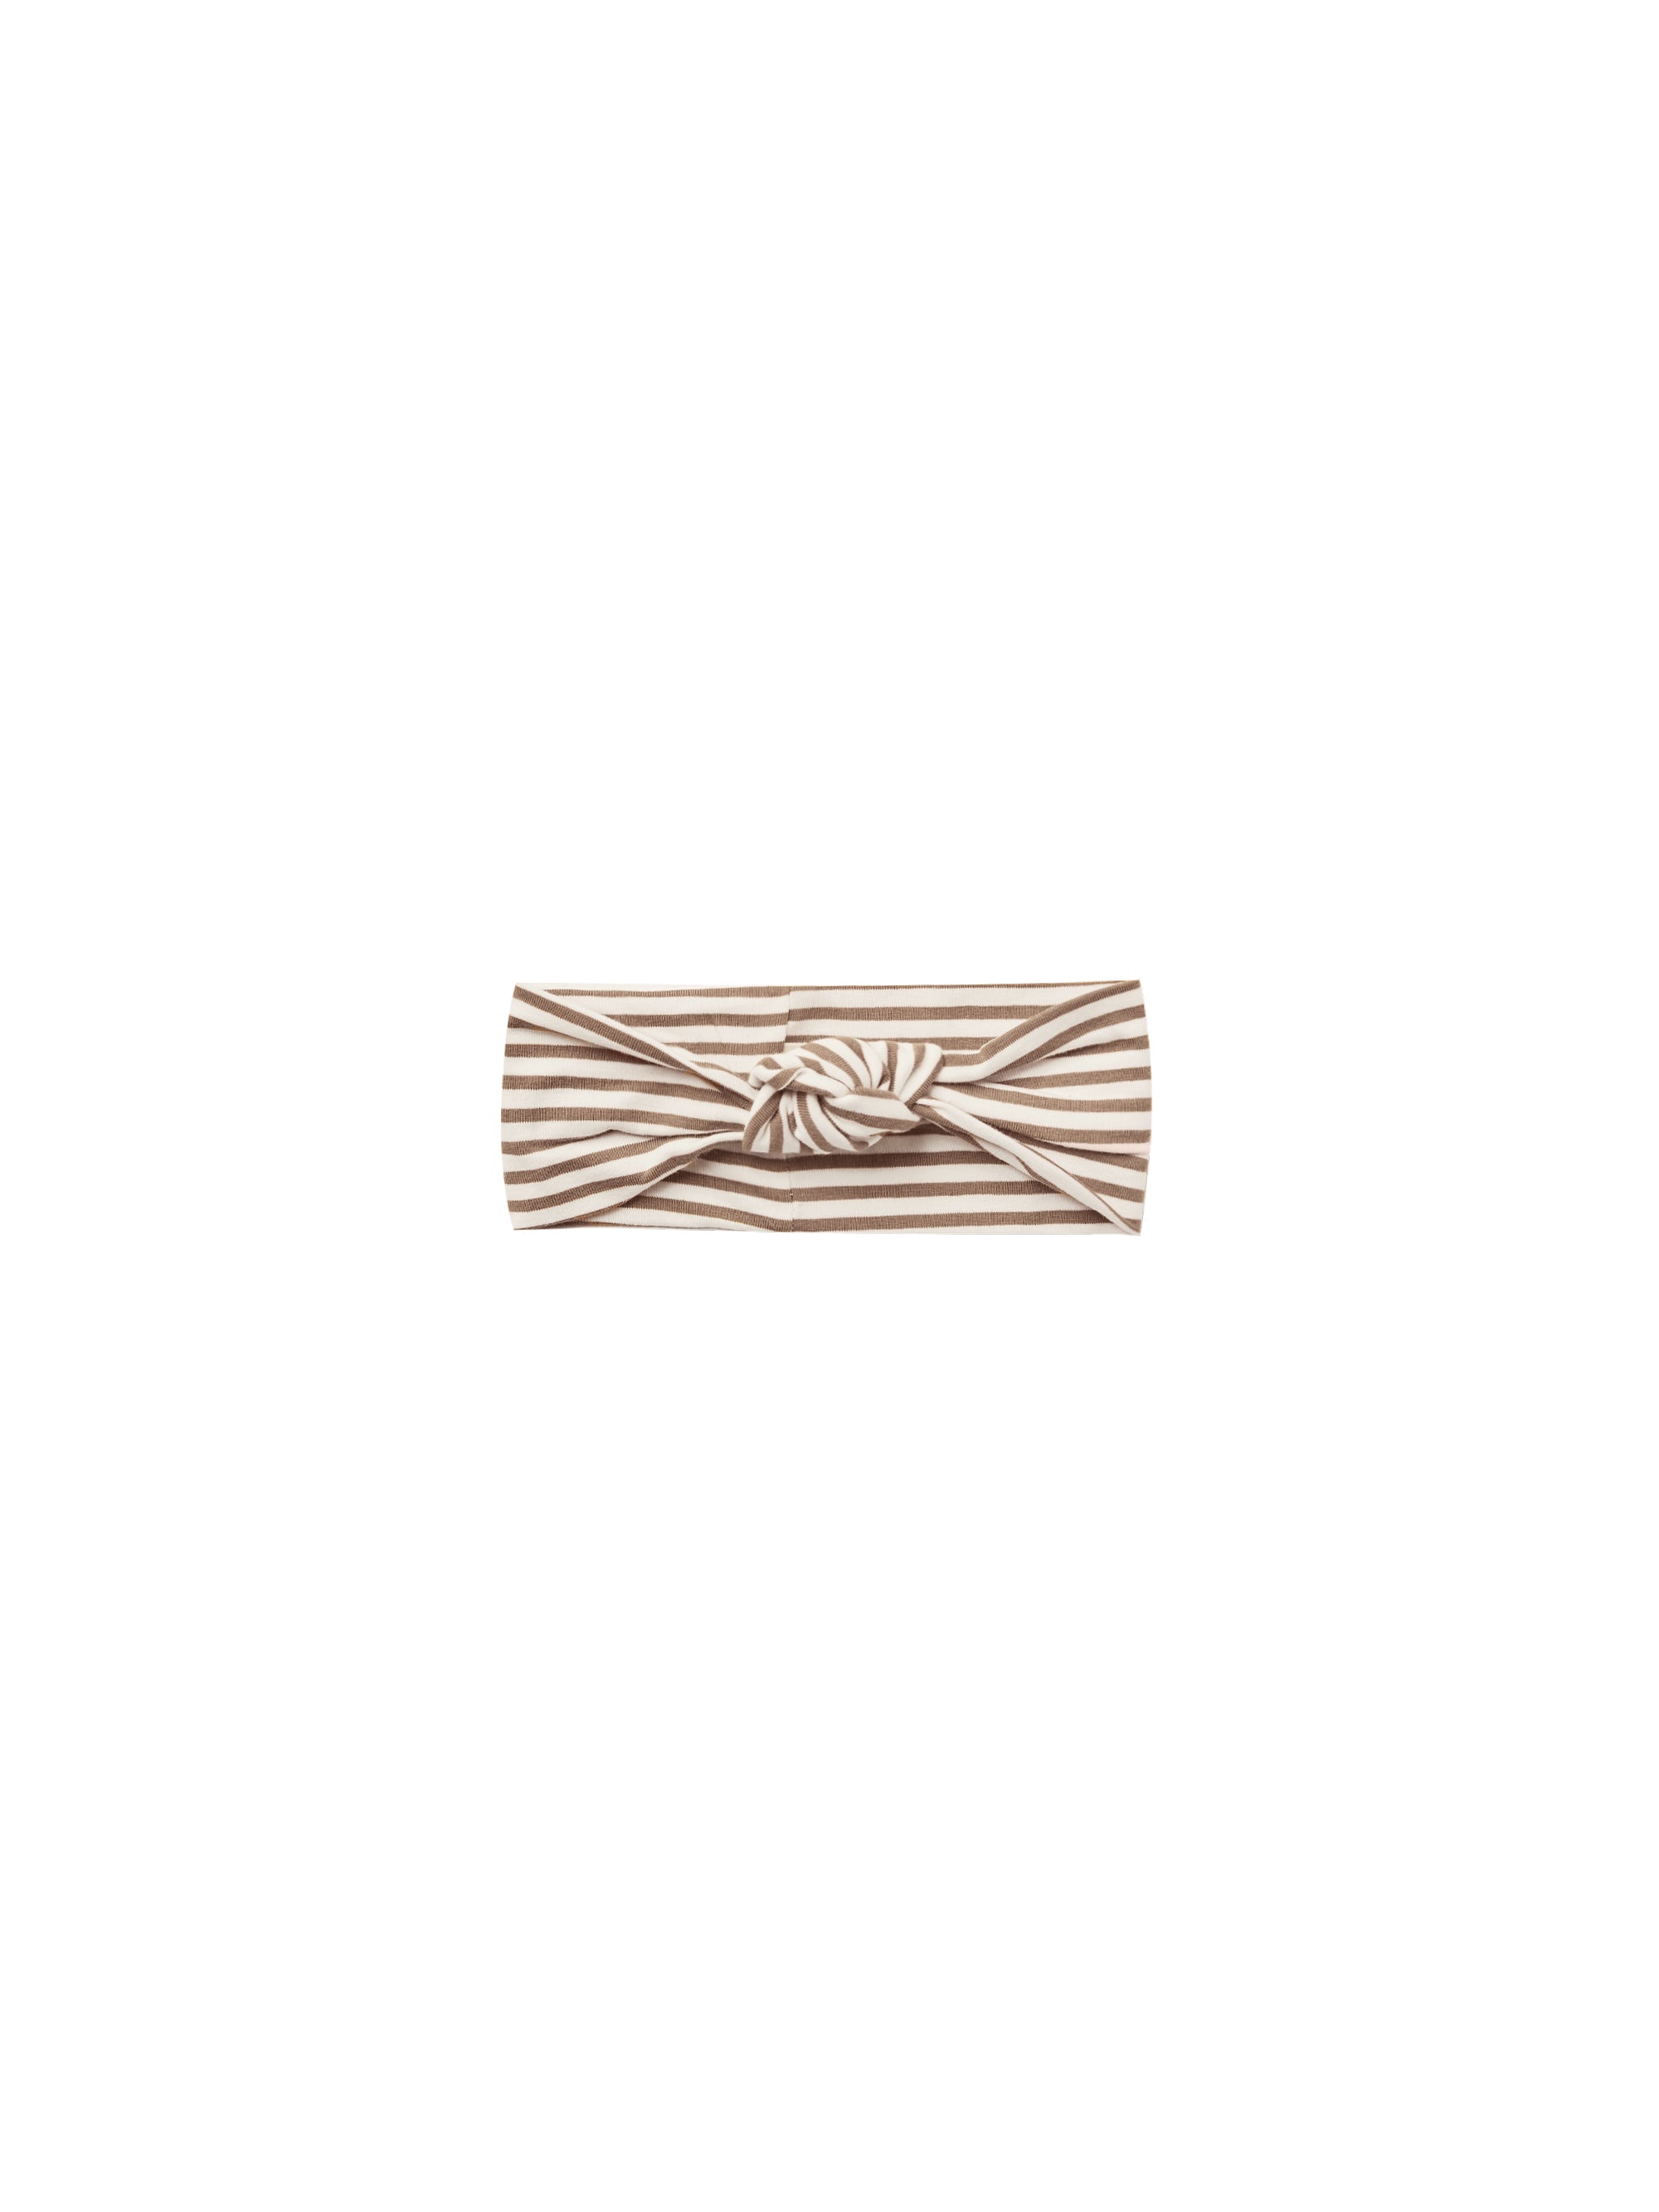 Quincy Mae Knotted Headband - Cocoa Stripe